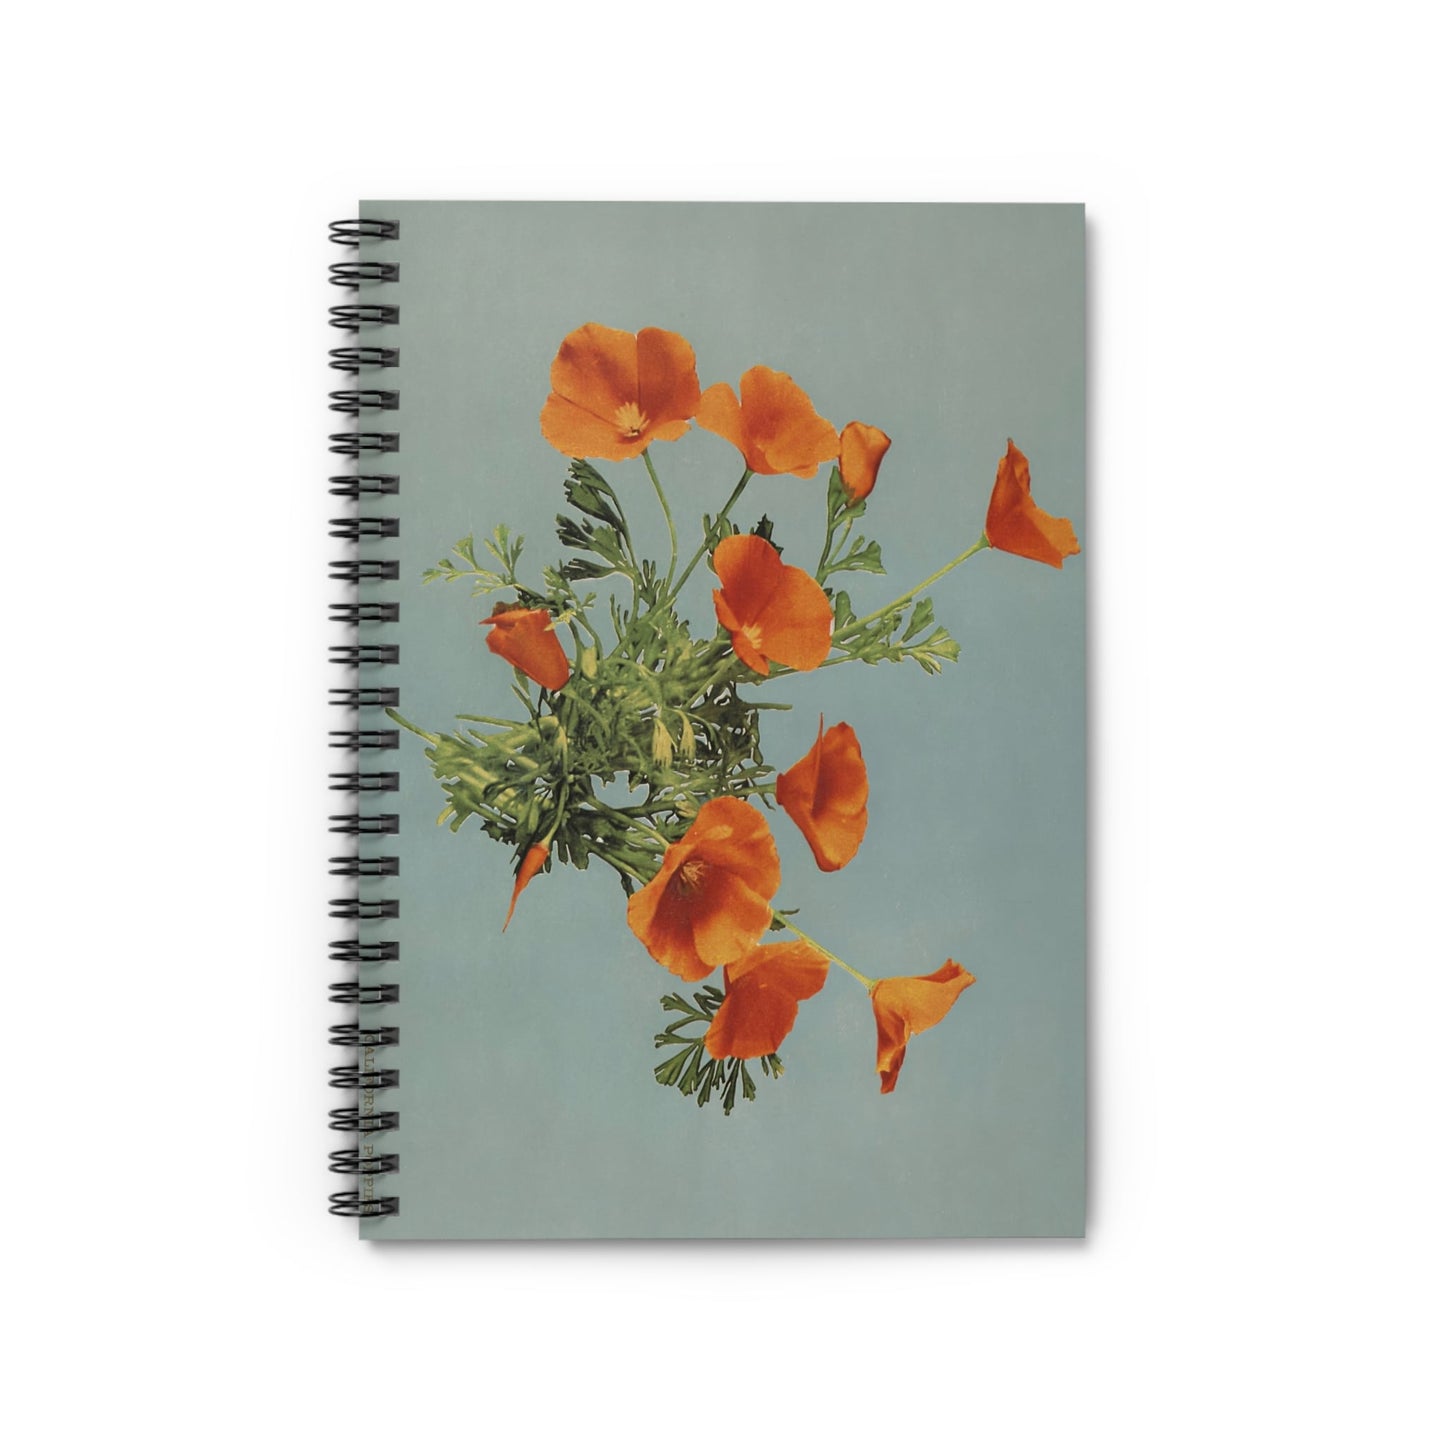 Vintage Floral Notebook with poppy flowers cover, ideal for journals and planners, showcasing beautiful poppy flower illustrations.